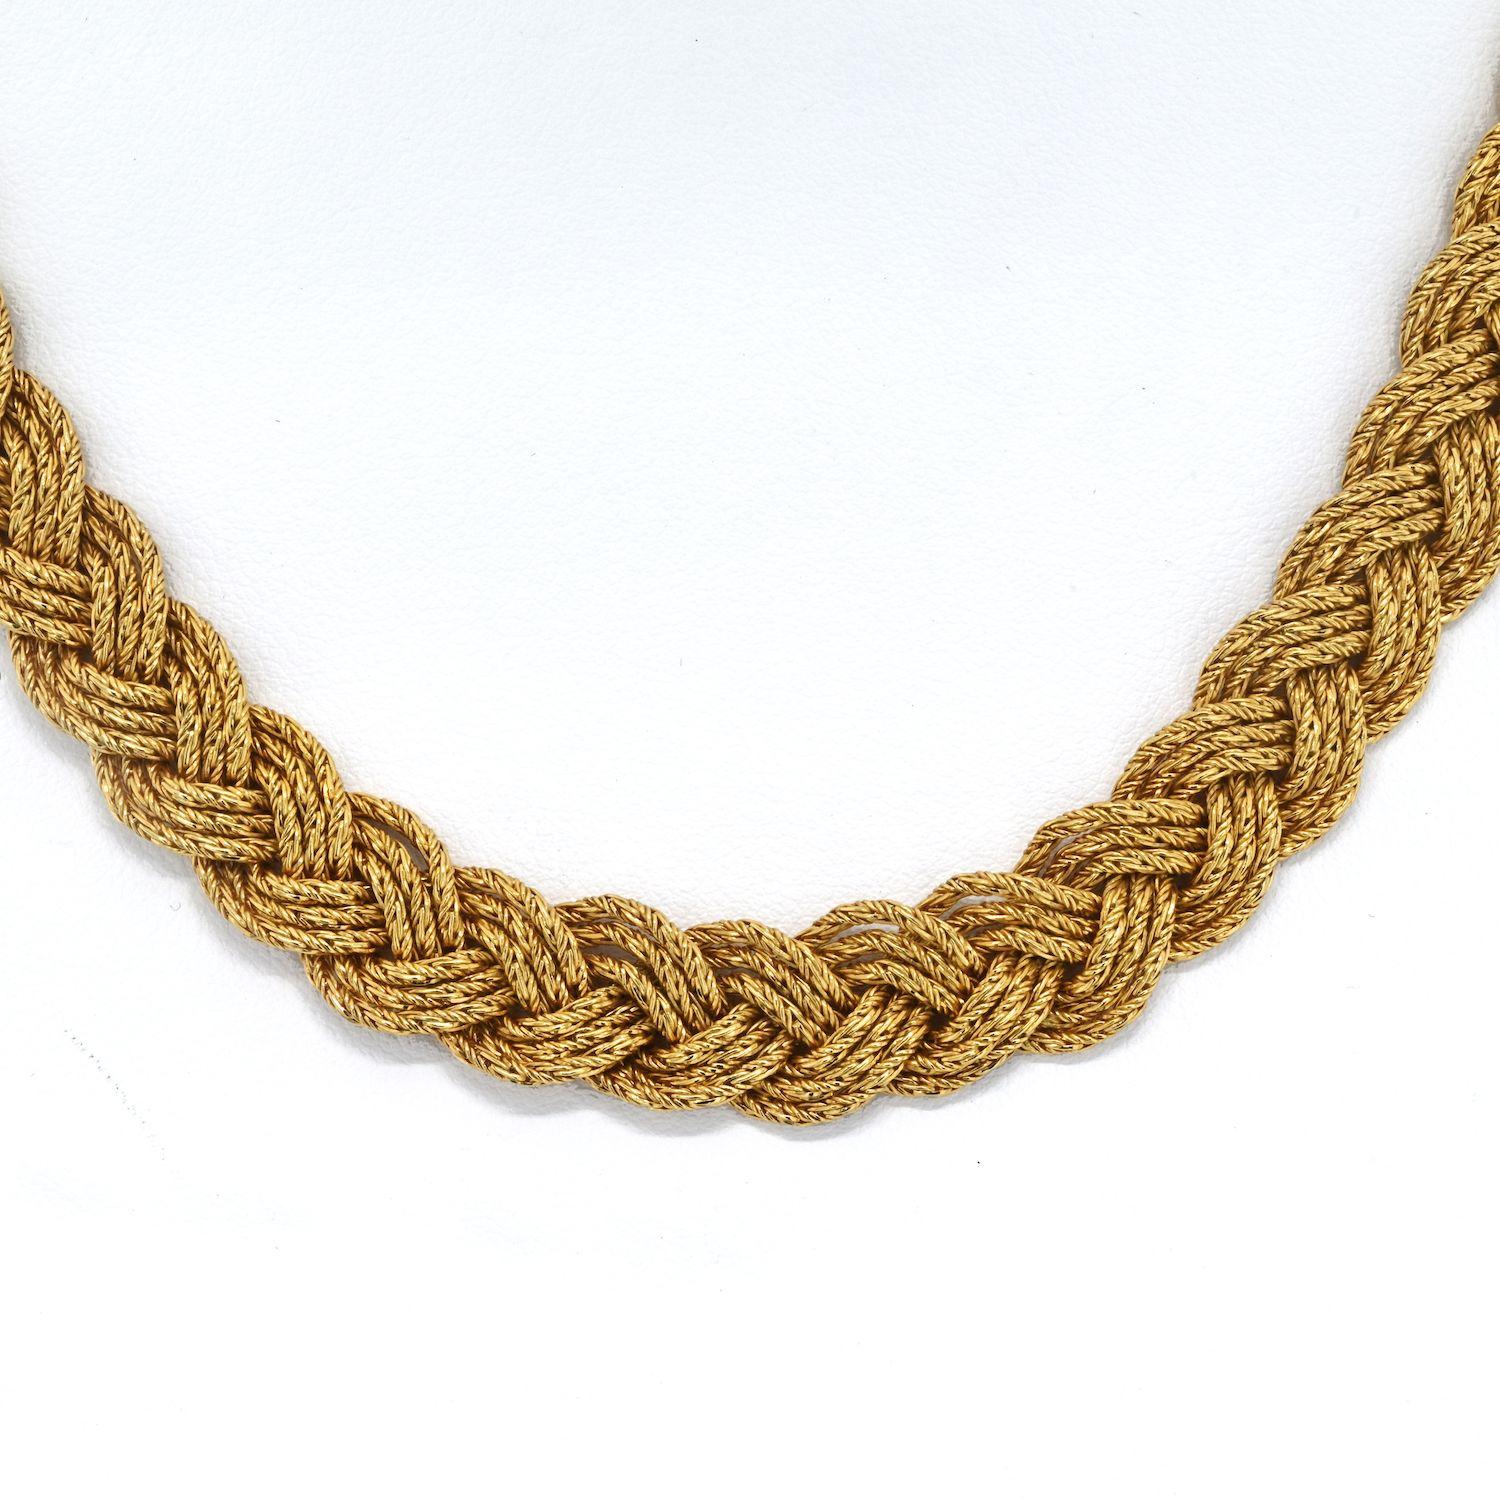 Modern Tiffany & Co. 18K Yellow Gold Woven Braided Style Solid Gold Necklace